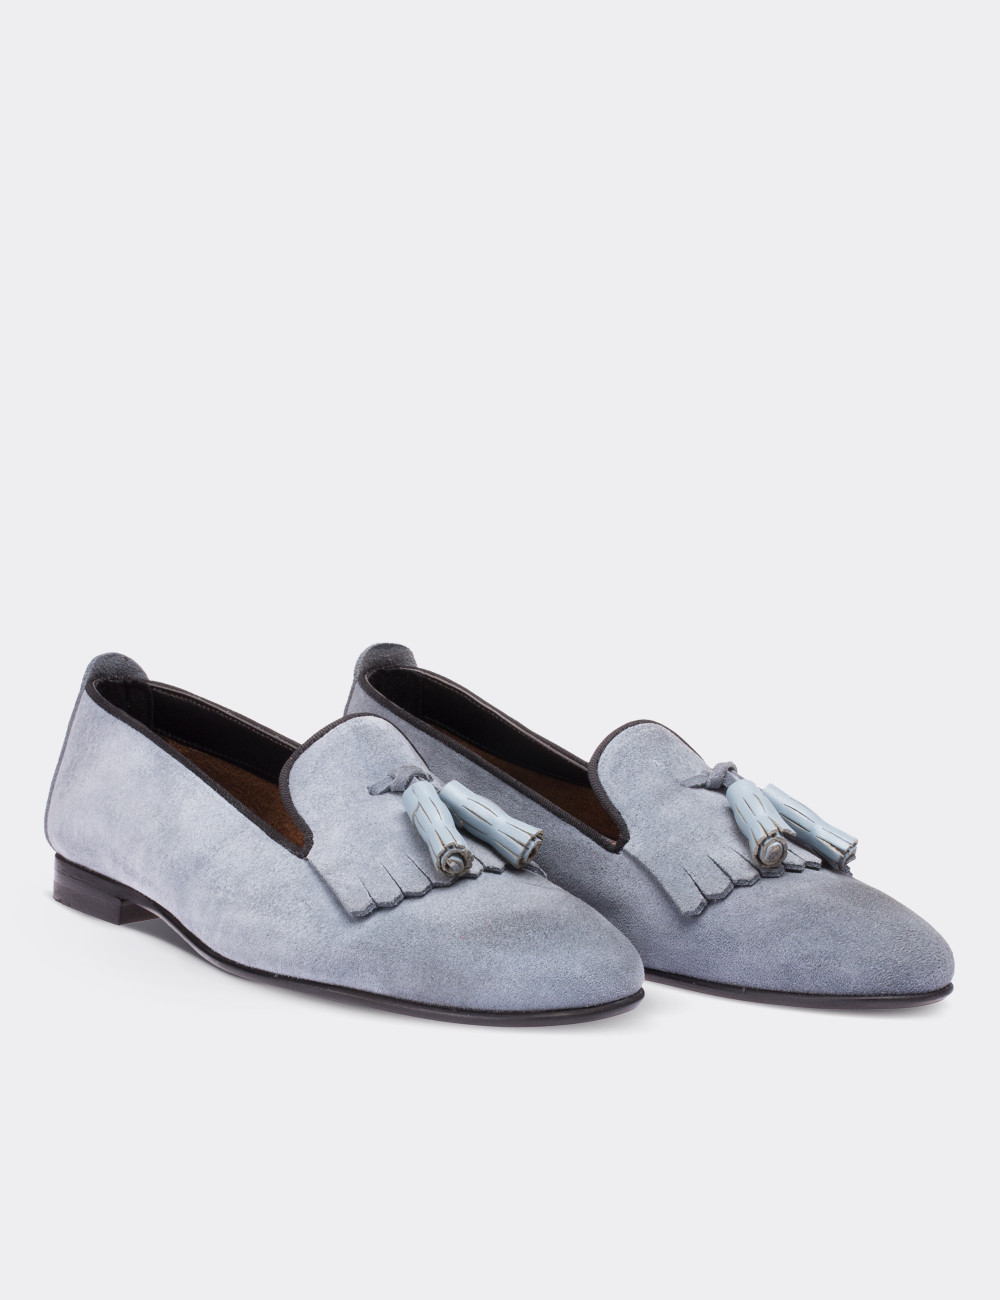 Blue Suede Leather Loafers - 01612ZMVIM01